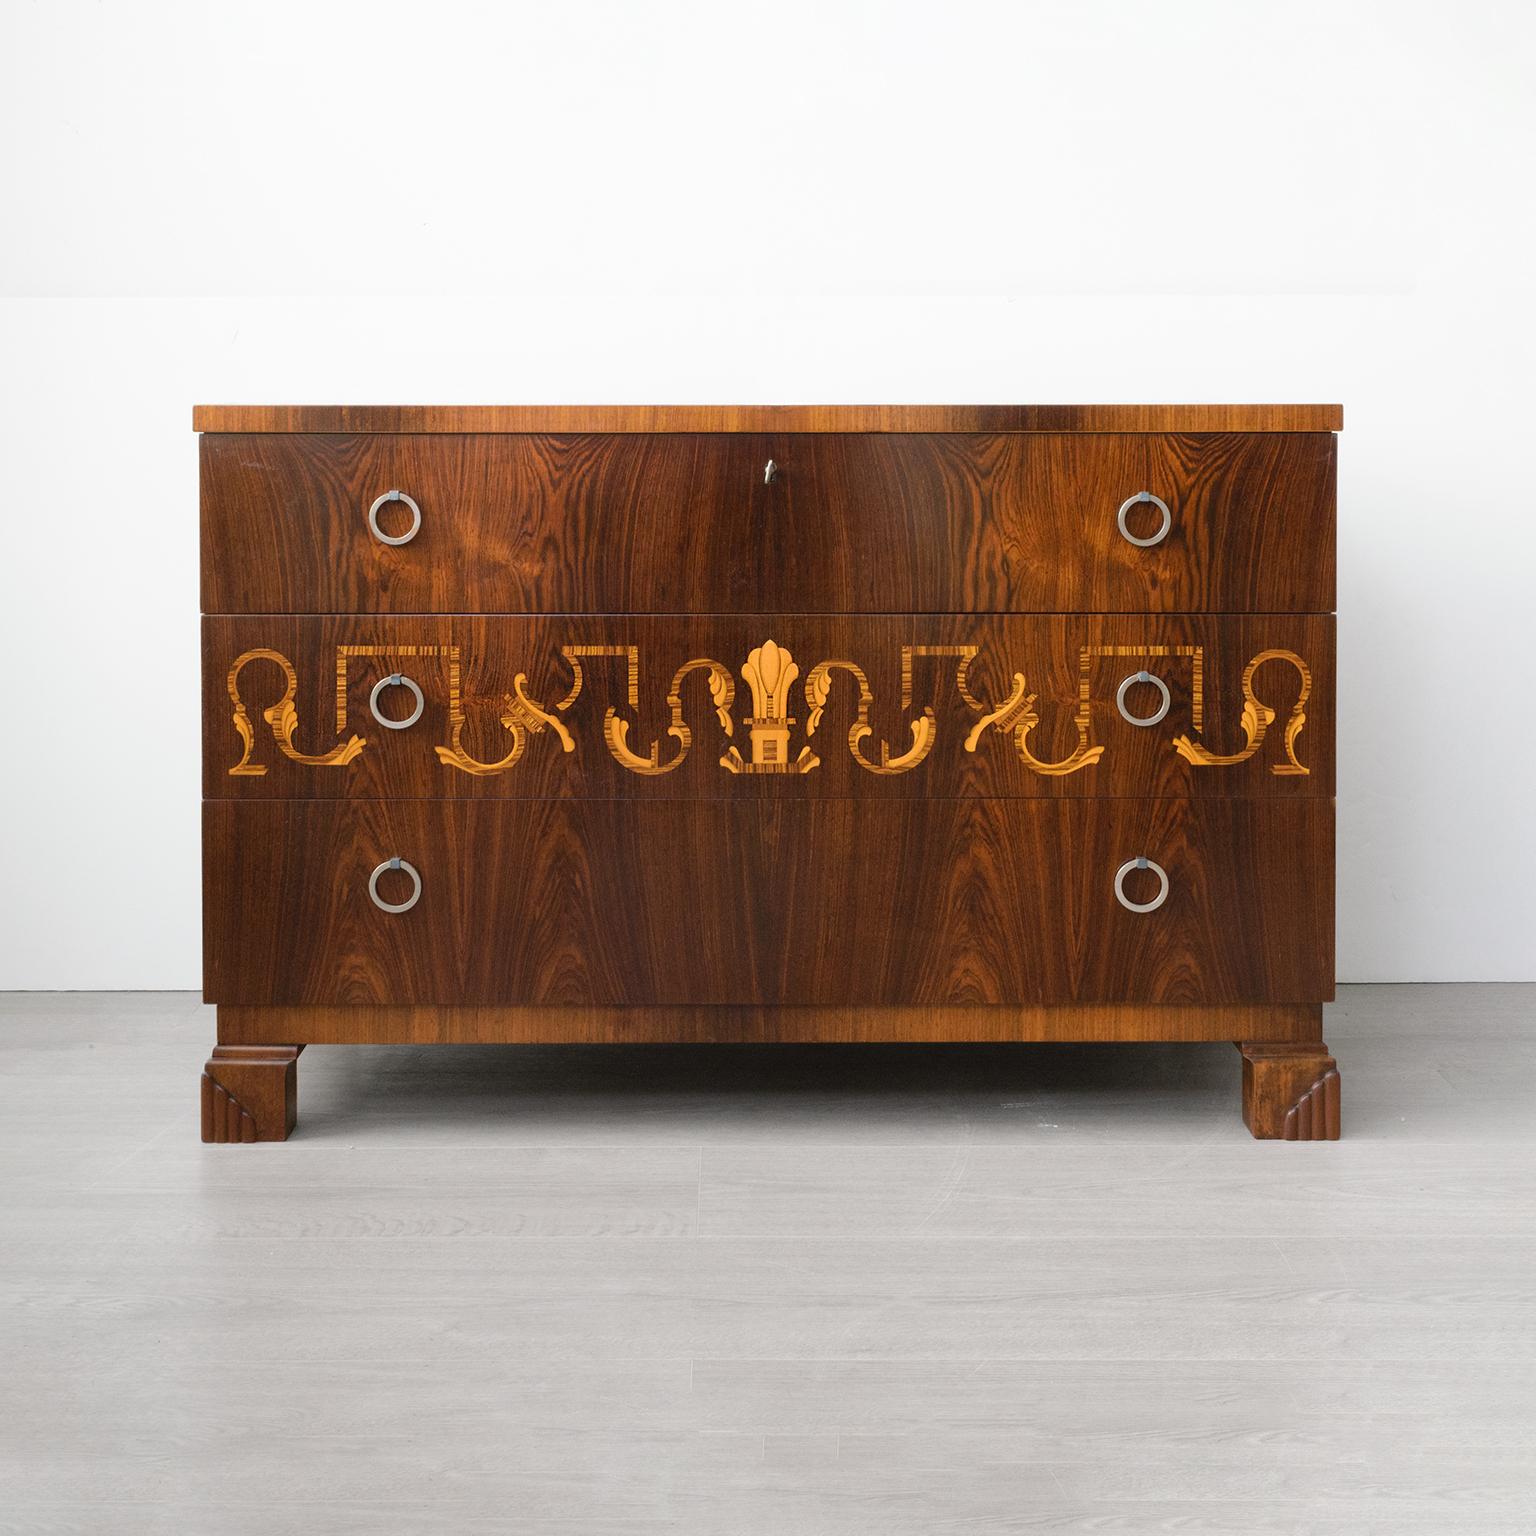 Bengt Lindeqrantz rosewood veneer, 3 drawer chest with a floral marquetry “:meander” design and ring pulls. Designed in Gothenburg, Sweden, circa 1928.

Measures: Width: 39.5